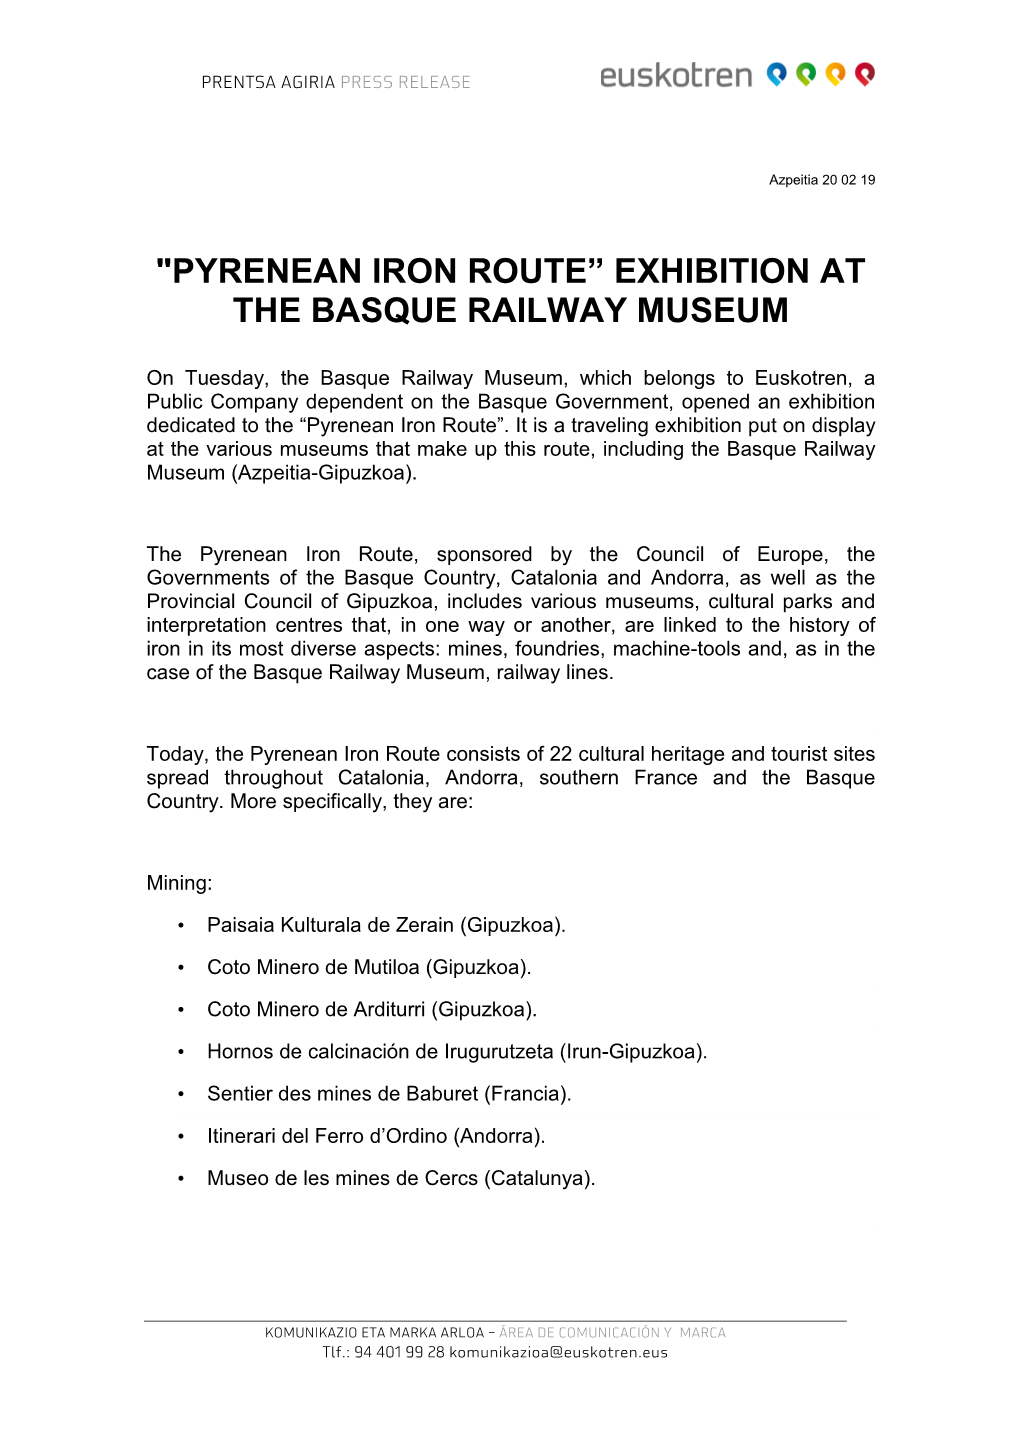 Pyrenean Iron Route” Exhibition at the Basque Railway Museum